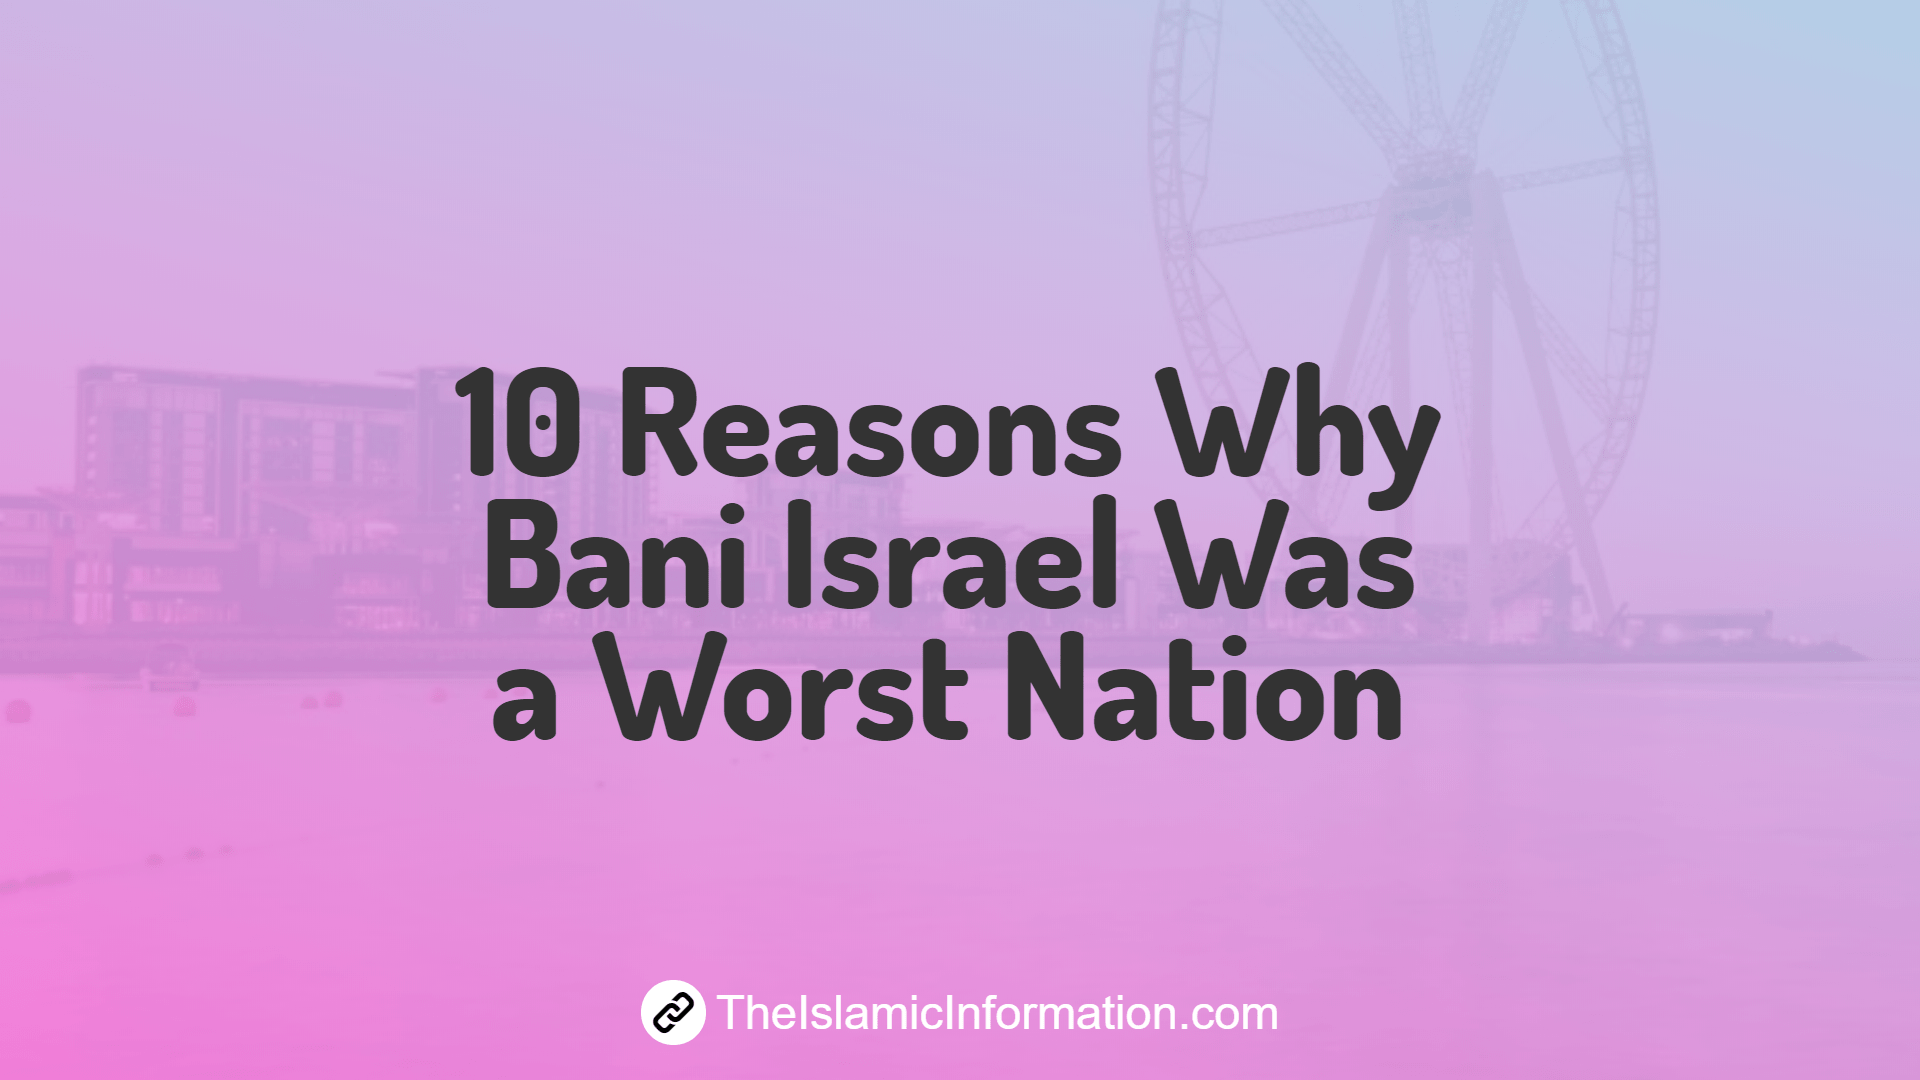 10 disobedience of bani israel makes it a worst nation